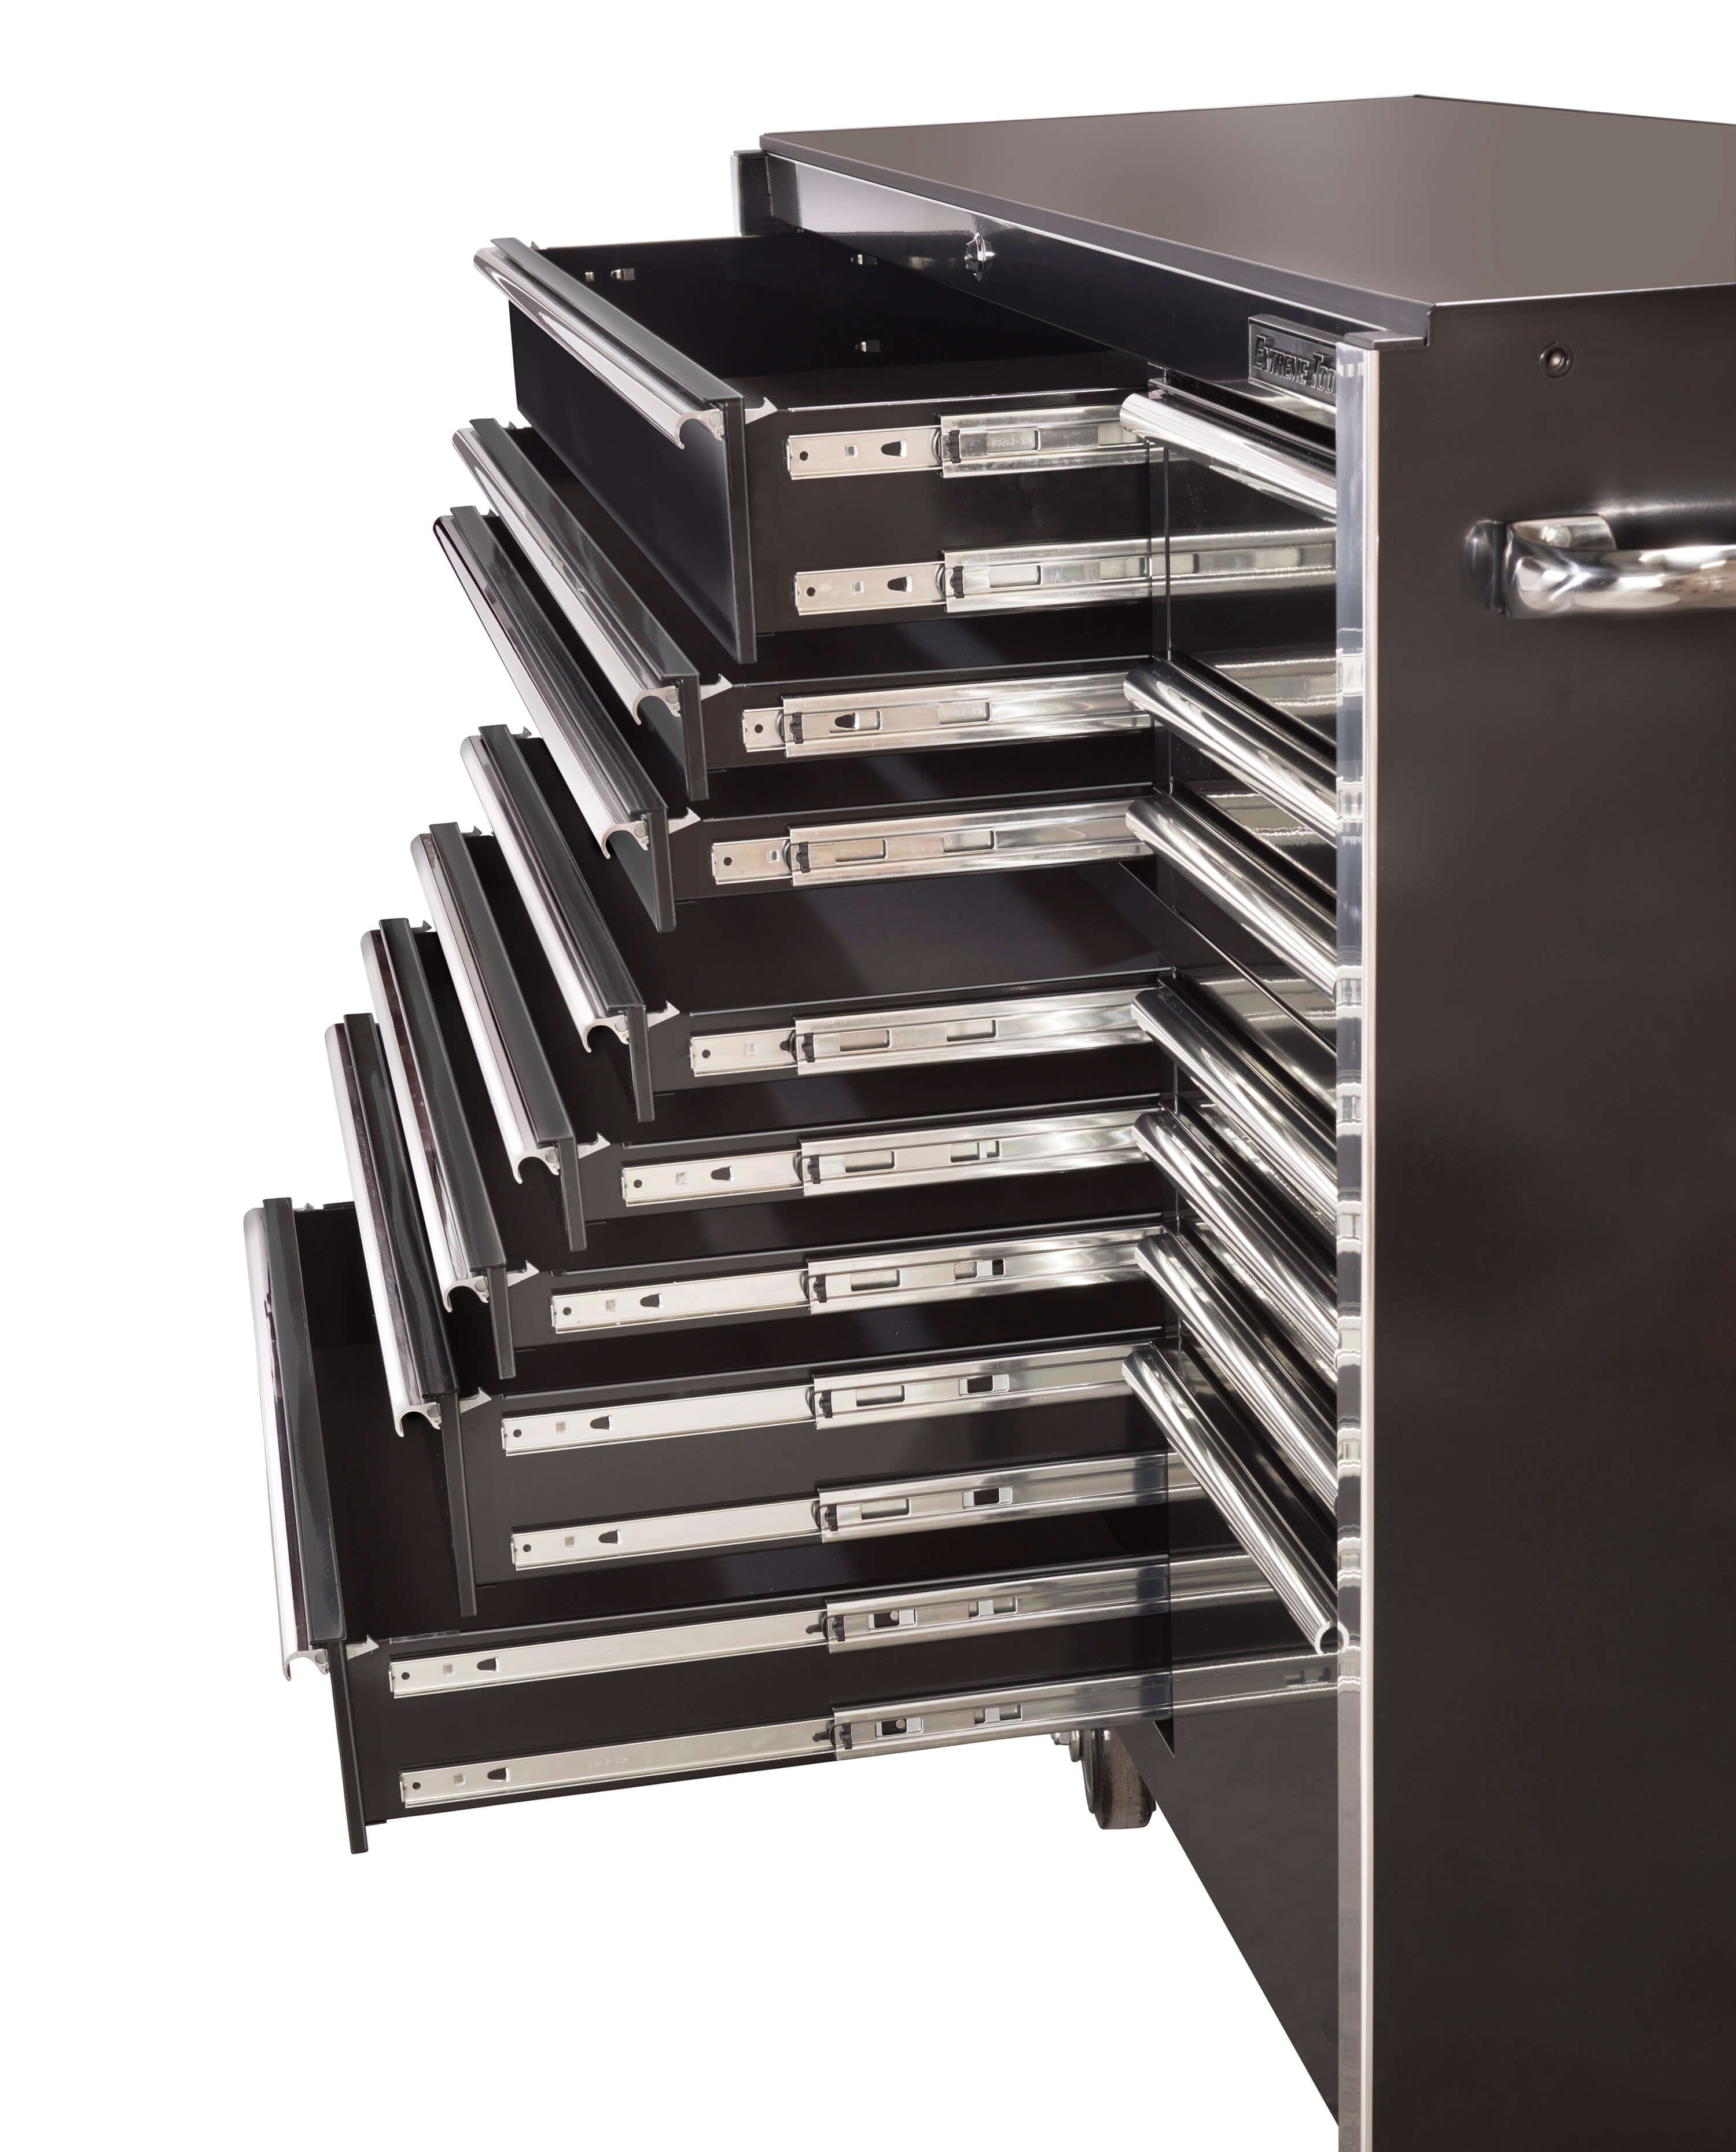 EXTREME TOOLS® 55 inch 12-Drawer Roller Cabinet